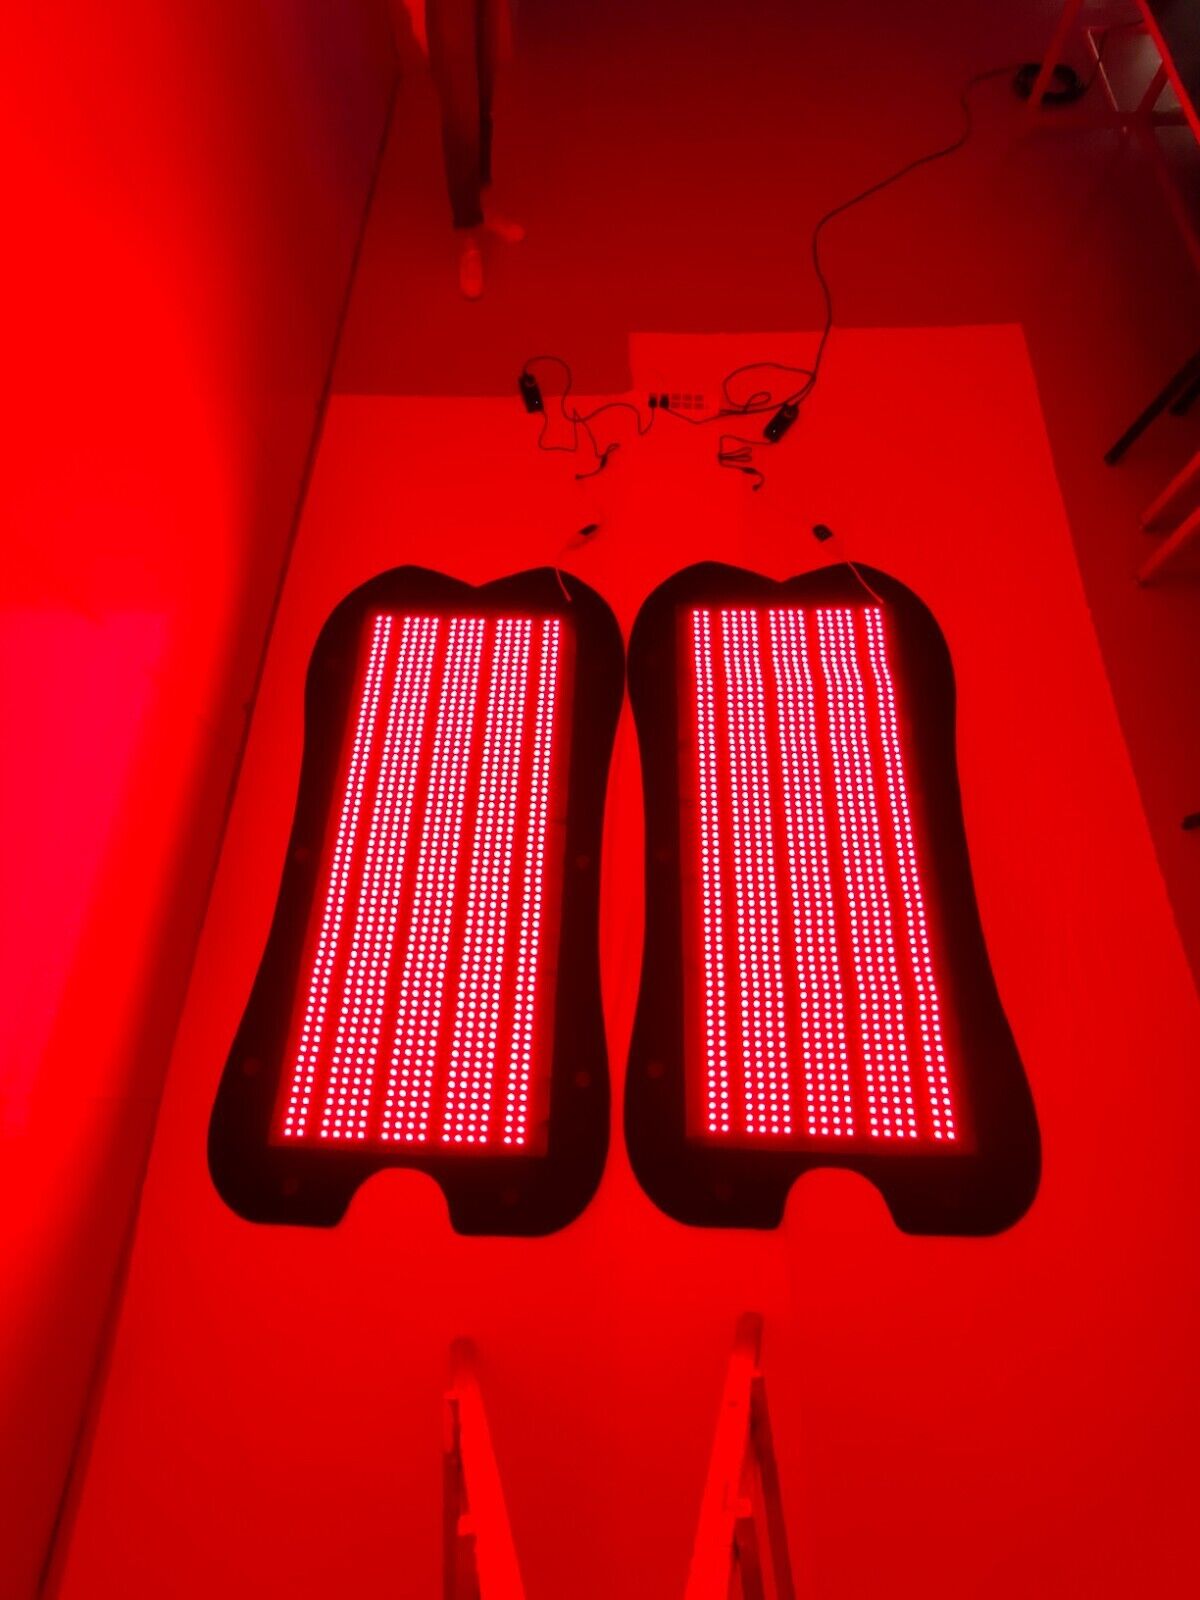 Super large size red light therapy for full body pain relief,  weight loss